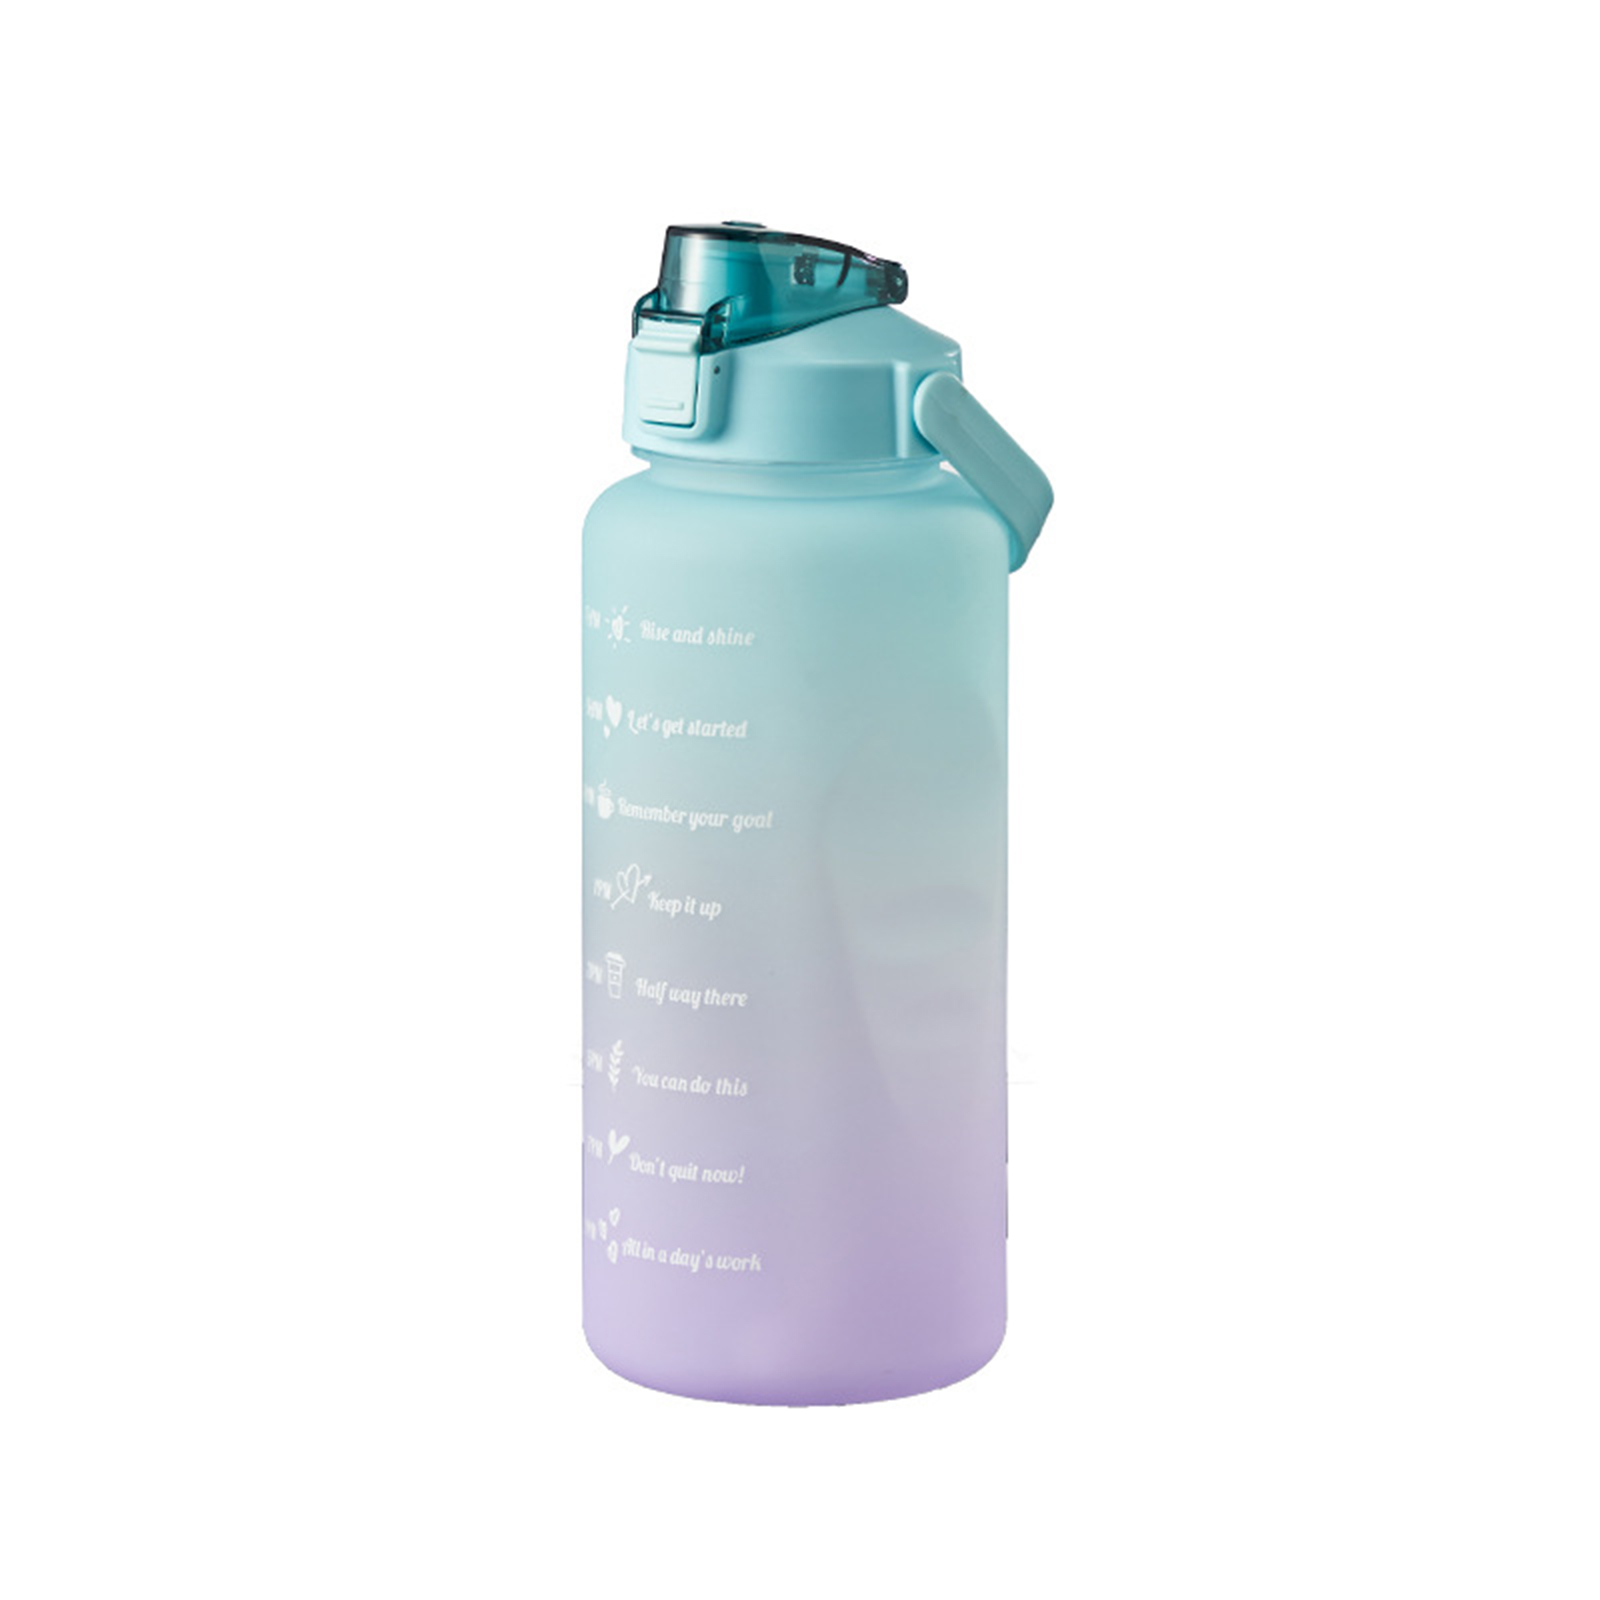 Motivational Water Bottle With Time Marker Reusable Water Bottle Plastic Bottle Leak Proof With Carry Handle For Gym Office 2L